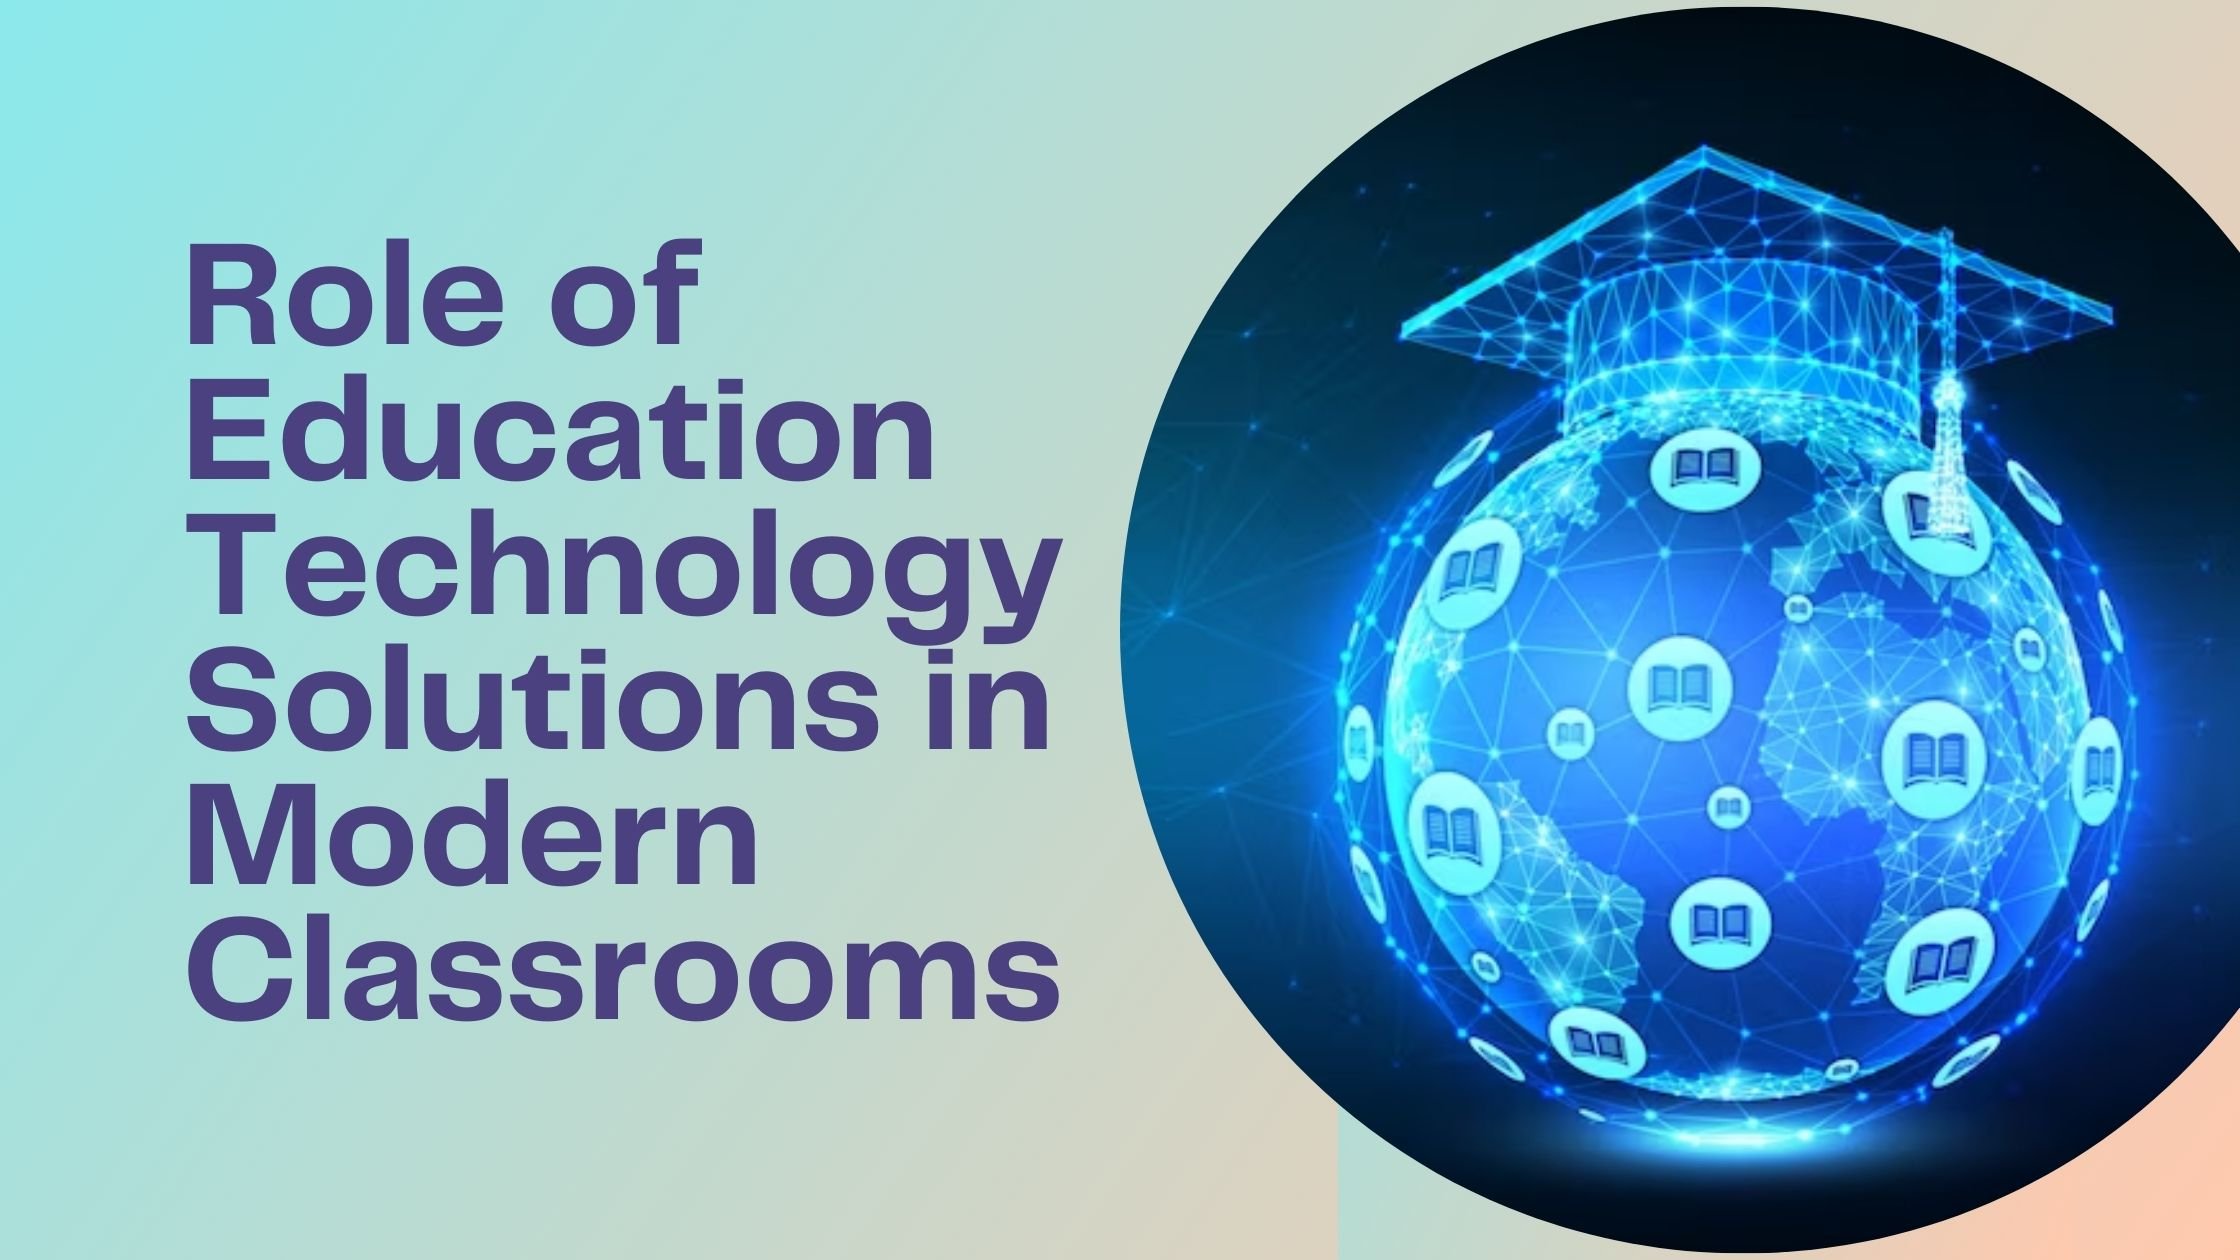 Role of Education Technology Solutions in Modern Classrooms